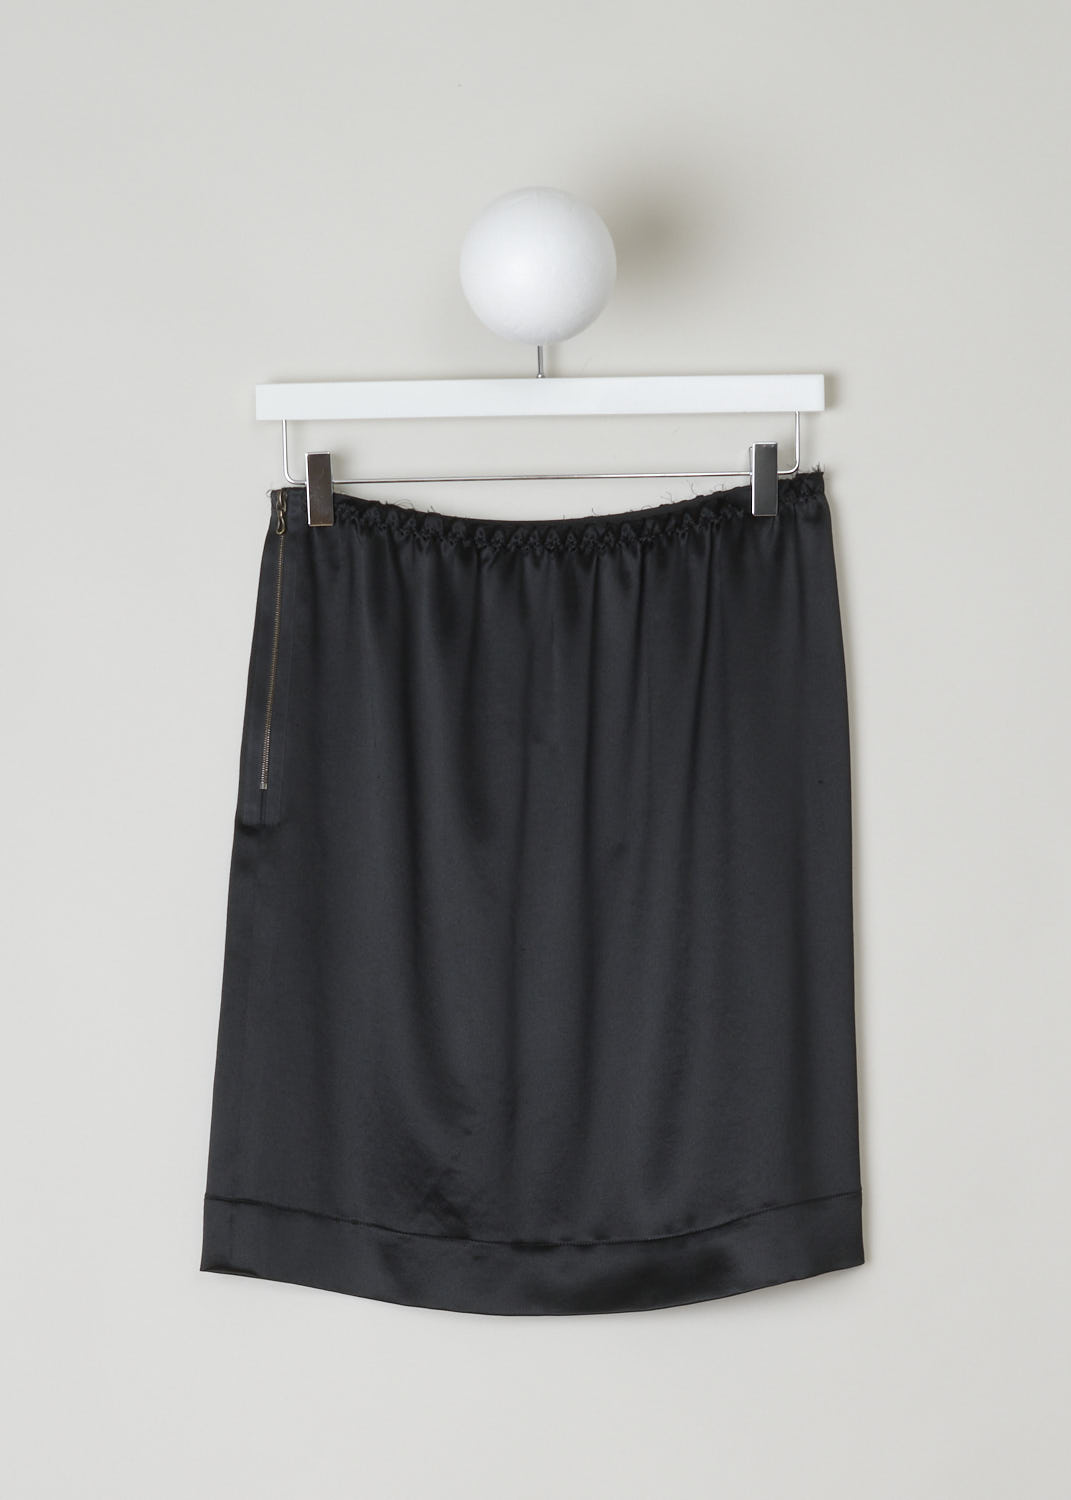 LANVIN, BLACK SILK MINI SKIRT, W040110626P3A, Black, Back, This silky smooth black mini skirt features an elasticated waistband with gathered silk ruffles, a bronze-toned side zipper and a broad hemline. 
